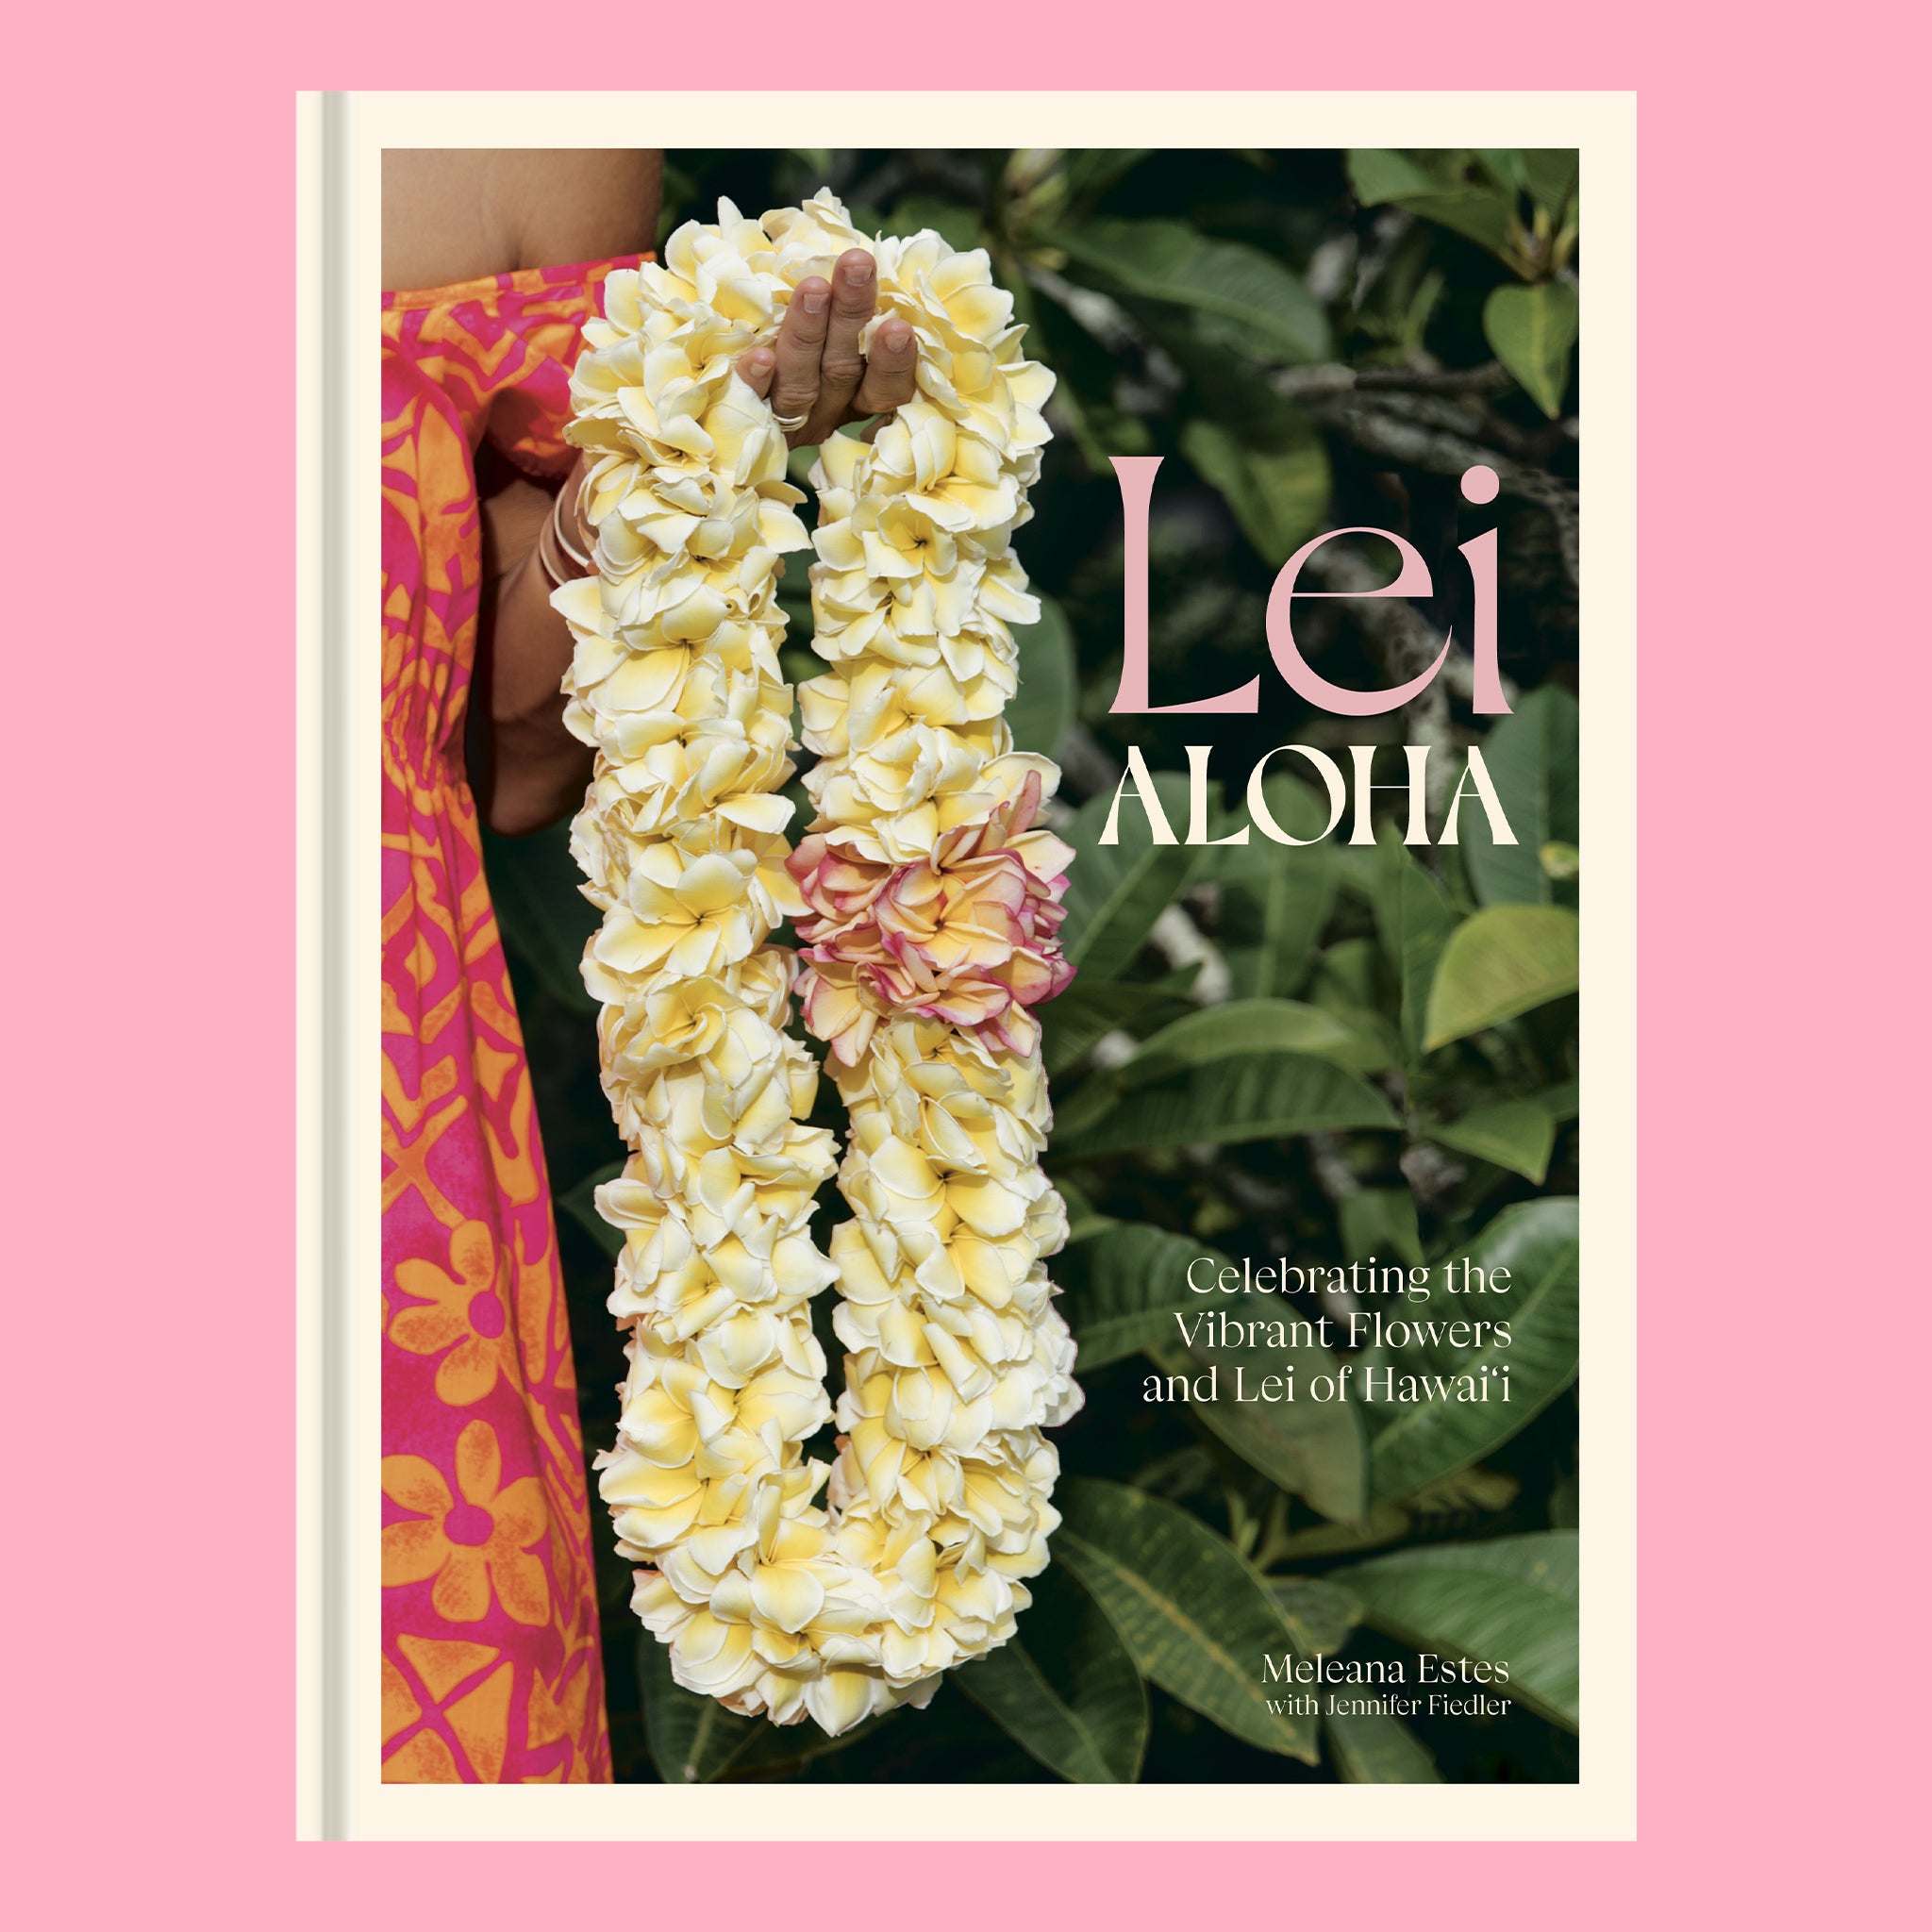 On a pink background is a book cover with green foliage and a model holding a lei along with the title of the book that reads, "Lei Aloha Celebrating the Vibrant Flowers and Lei of Hawai'i". 